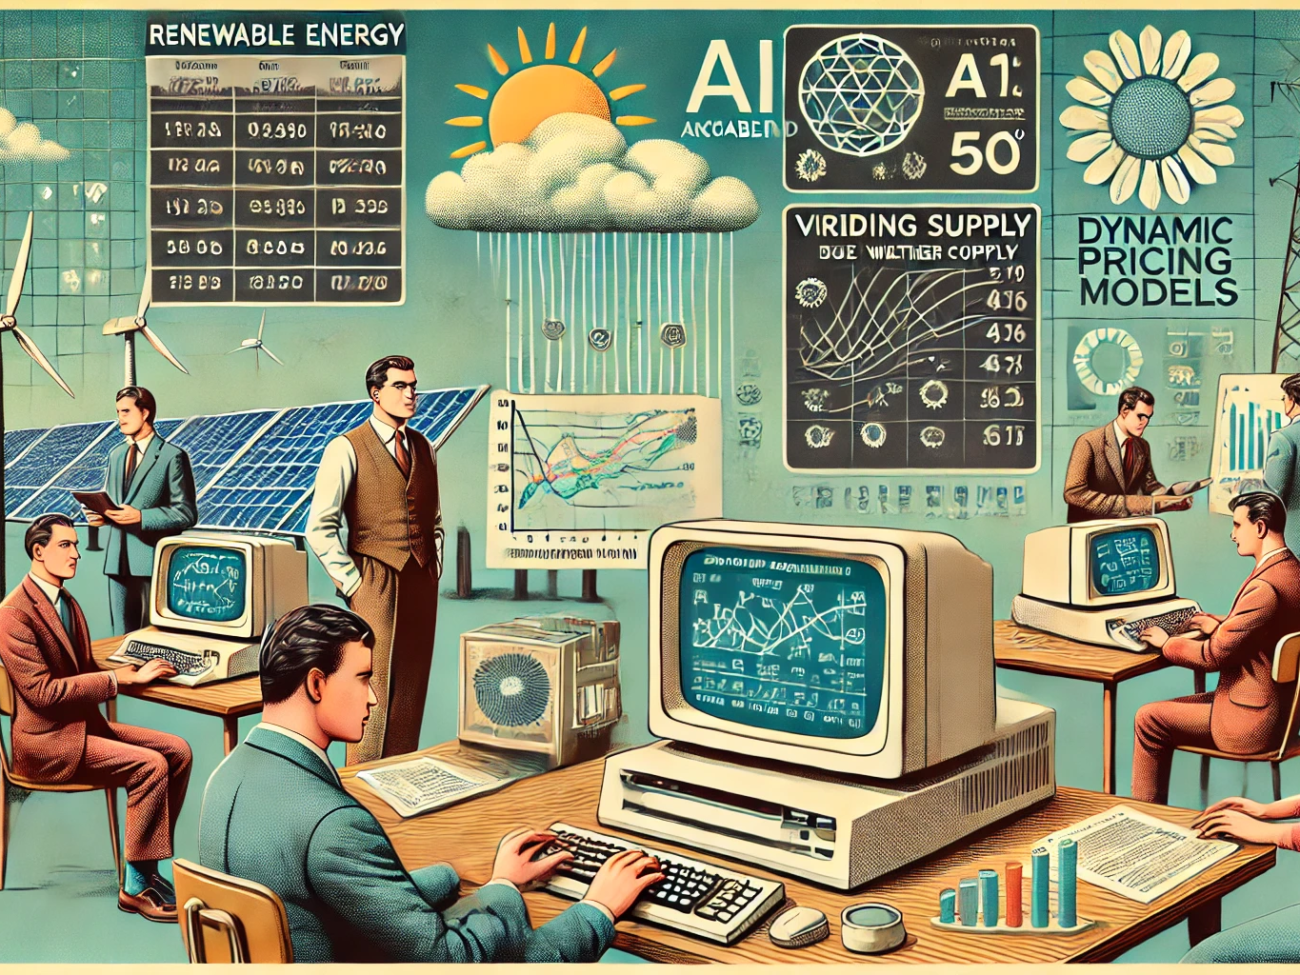 DALL·E 2024-07-03 18.27.07 - A 1970s-themed illustration of AI-enabled accounting for renewable energy with varying supply due to weather conditions. The scene includes analysts i